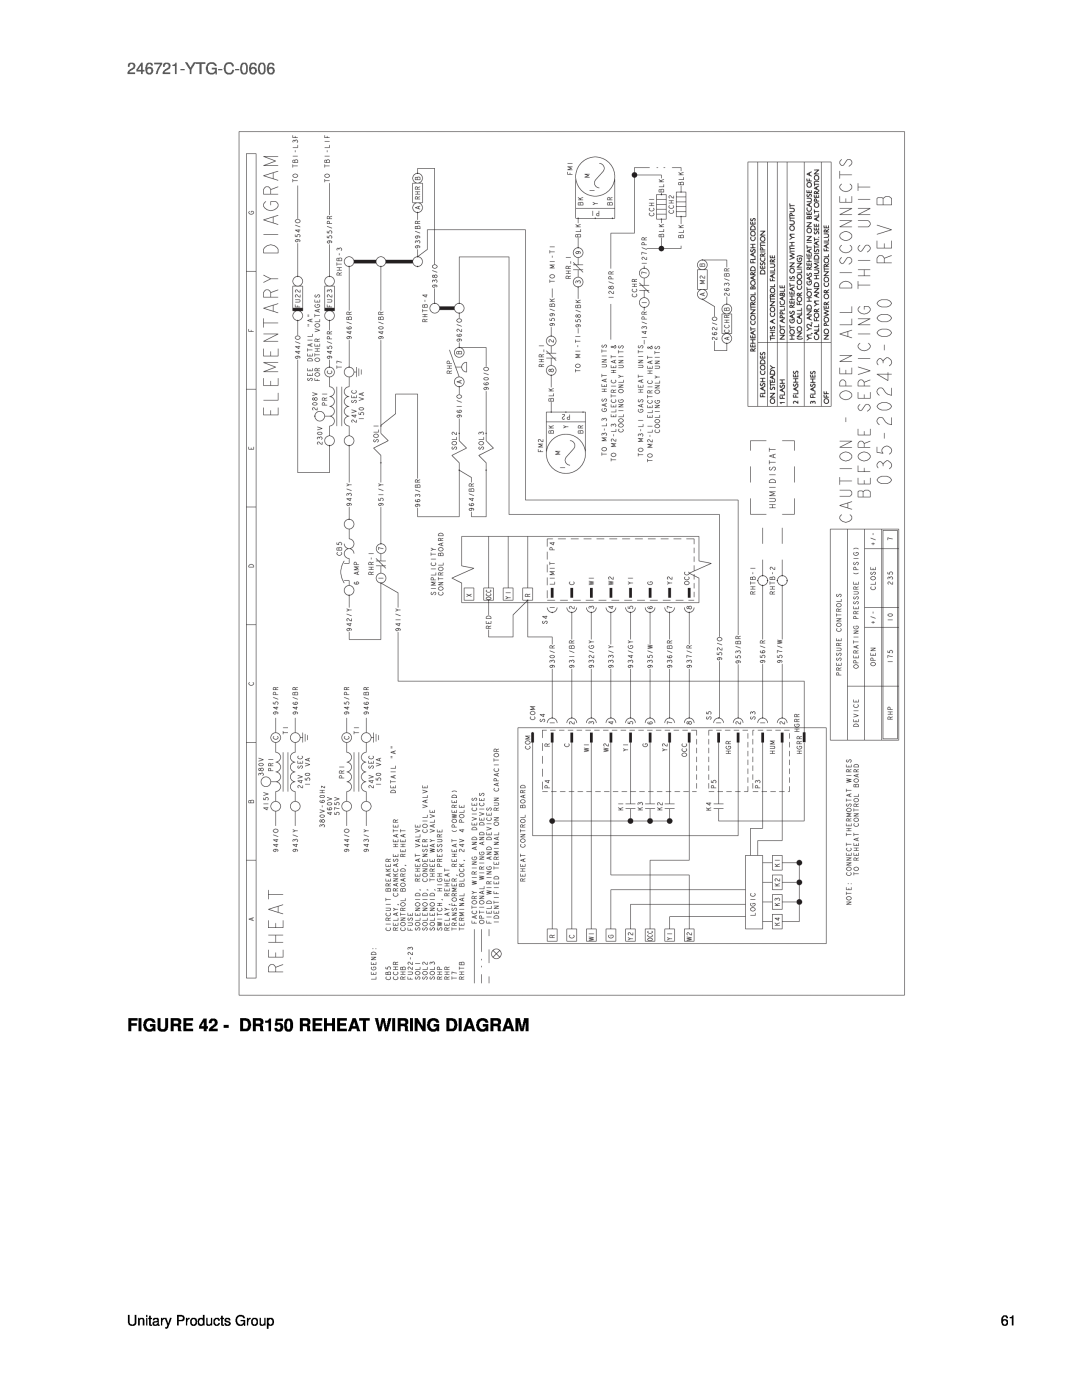 York DR090, DR120 manual DR150 REHEAT WIRING DIAGRAM, YTG-C-0606, Unitary Products Group 